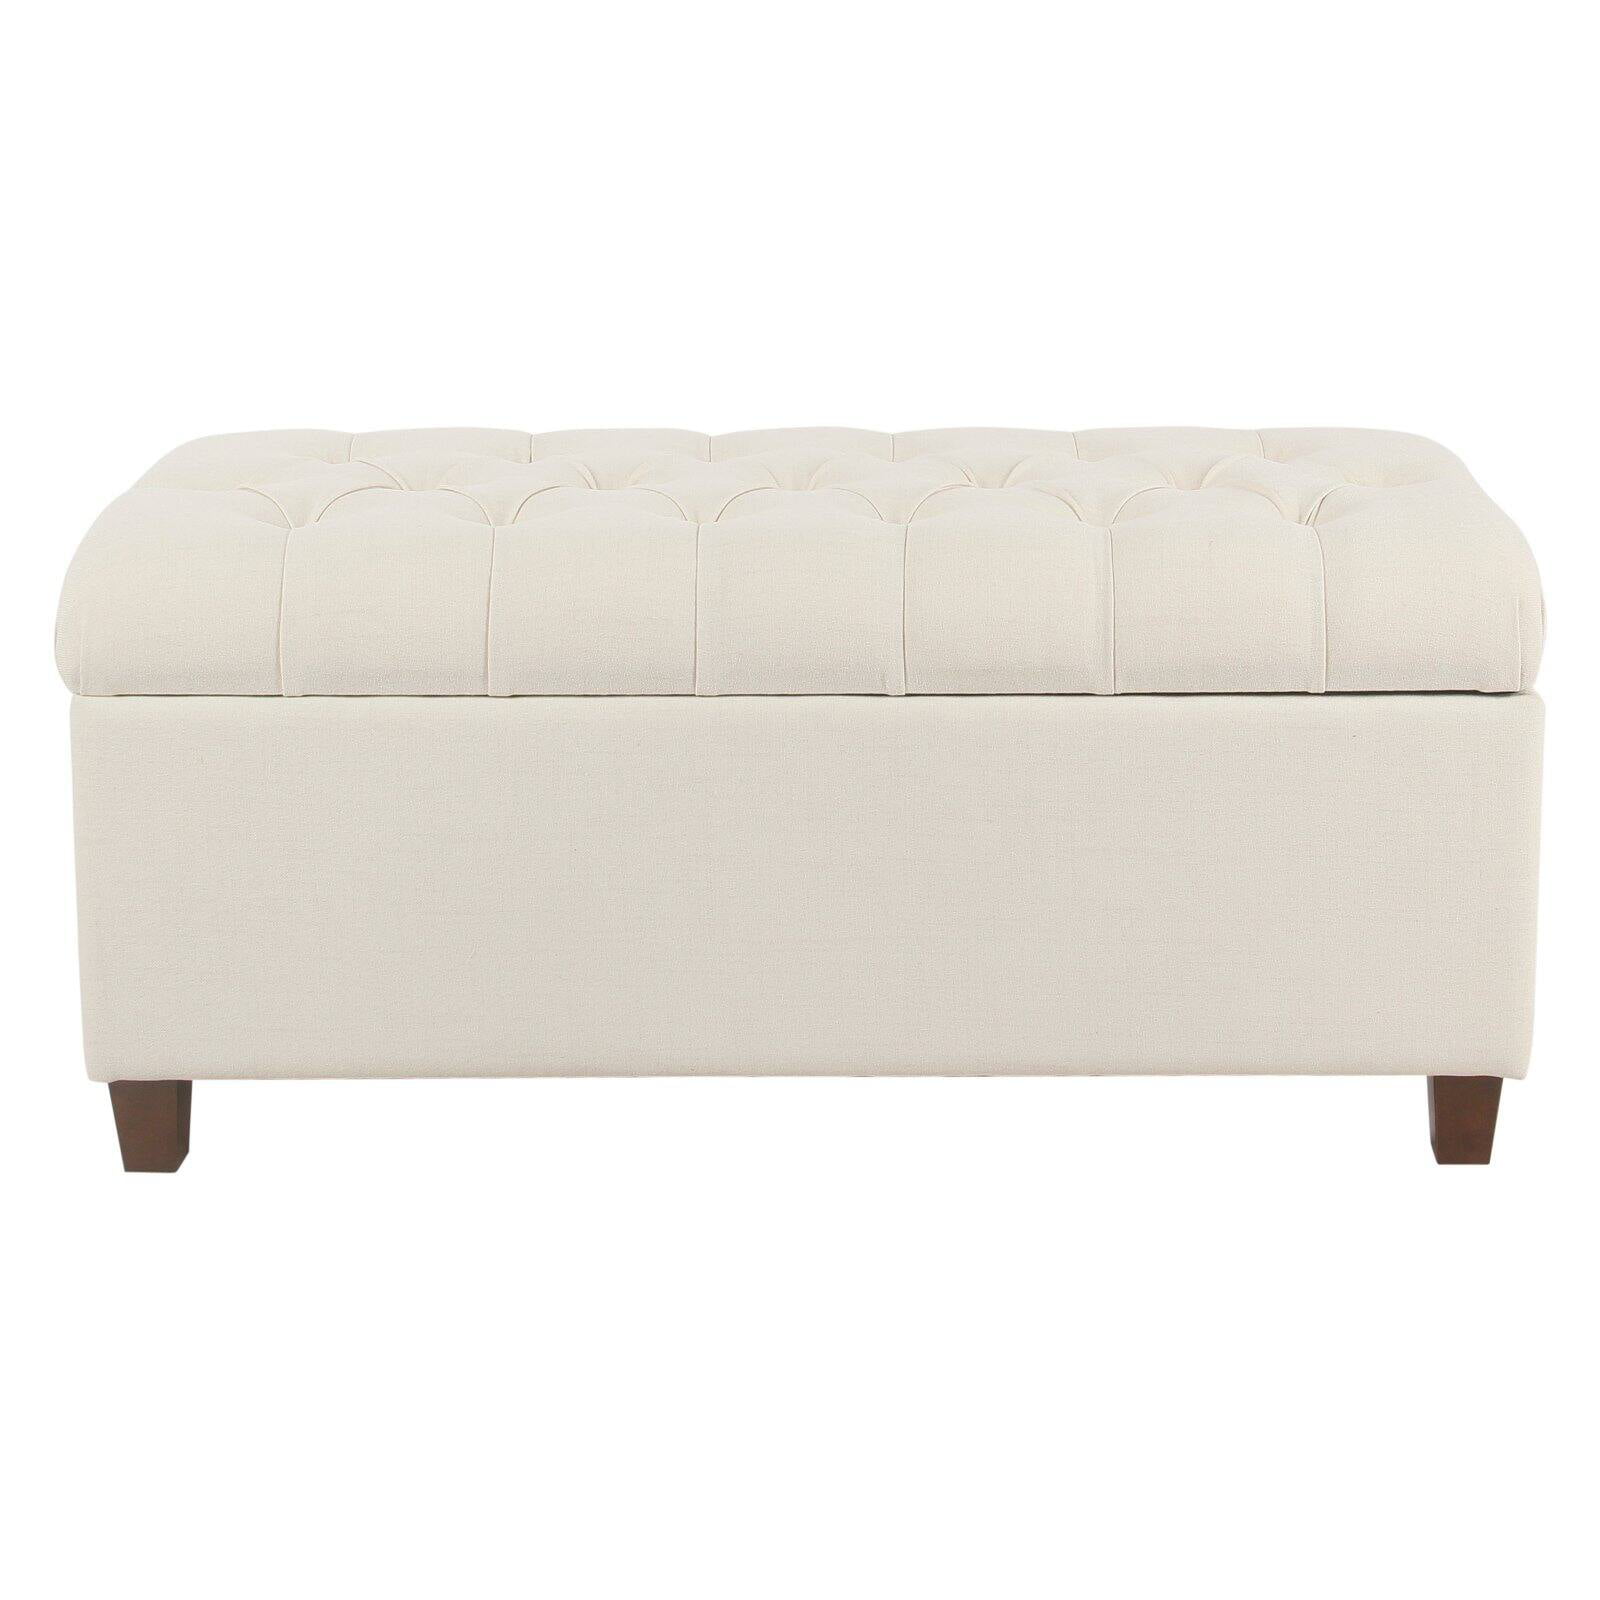 Photo 1 of HomePop Ainsley Button Tufted Storage Bench Multiple Colors